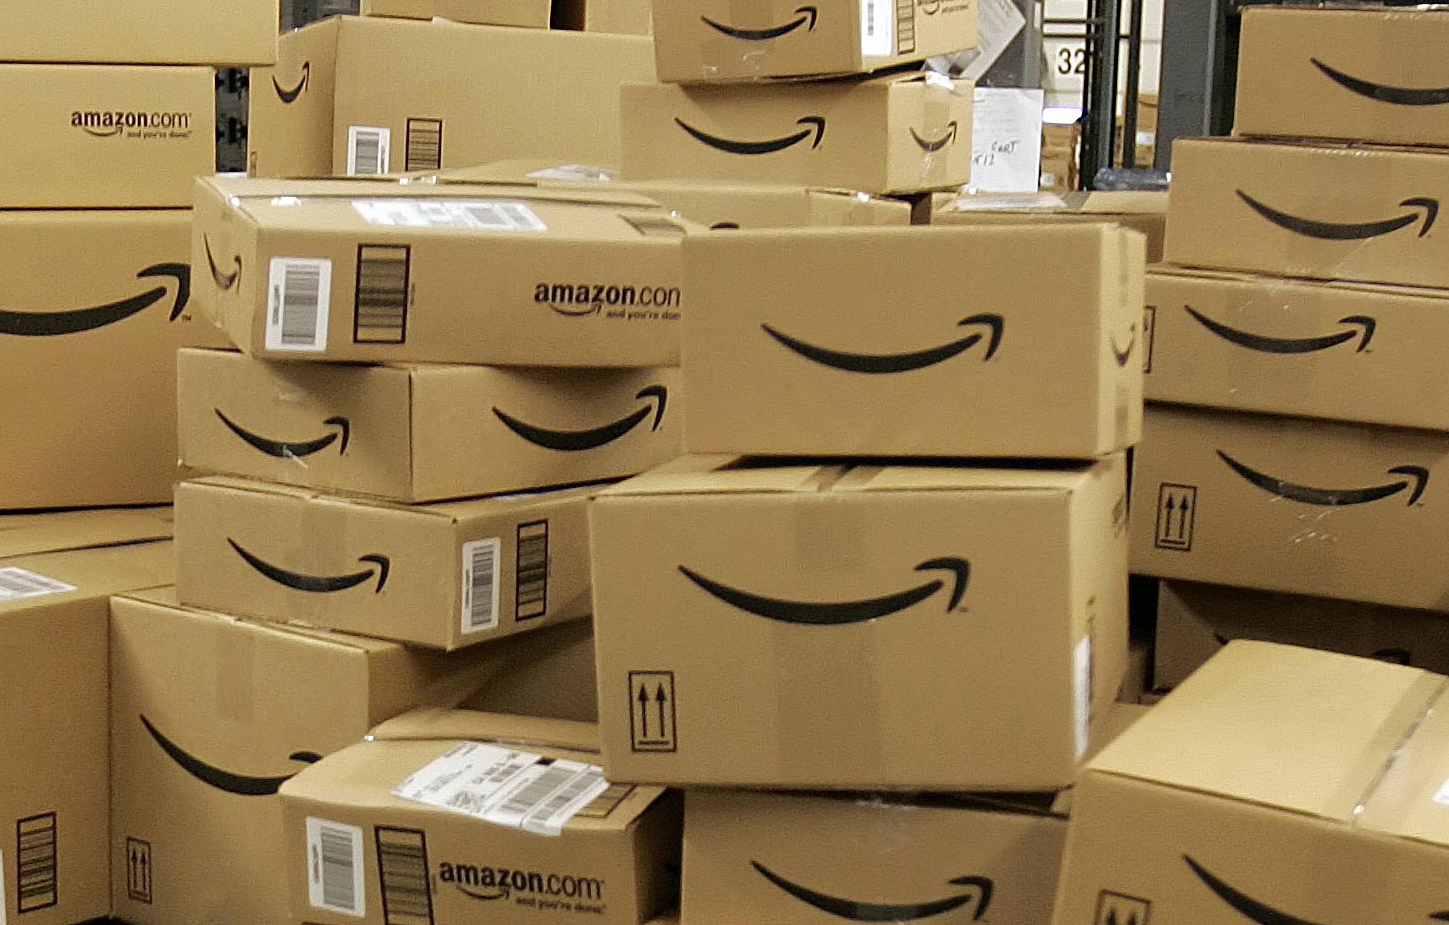 Geek insider, geekinsider, geekinsider. Com,, how an amazon review turns into a lawsuit, news